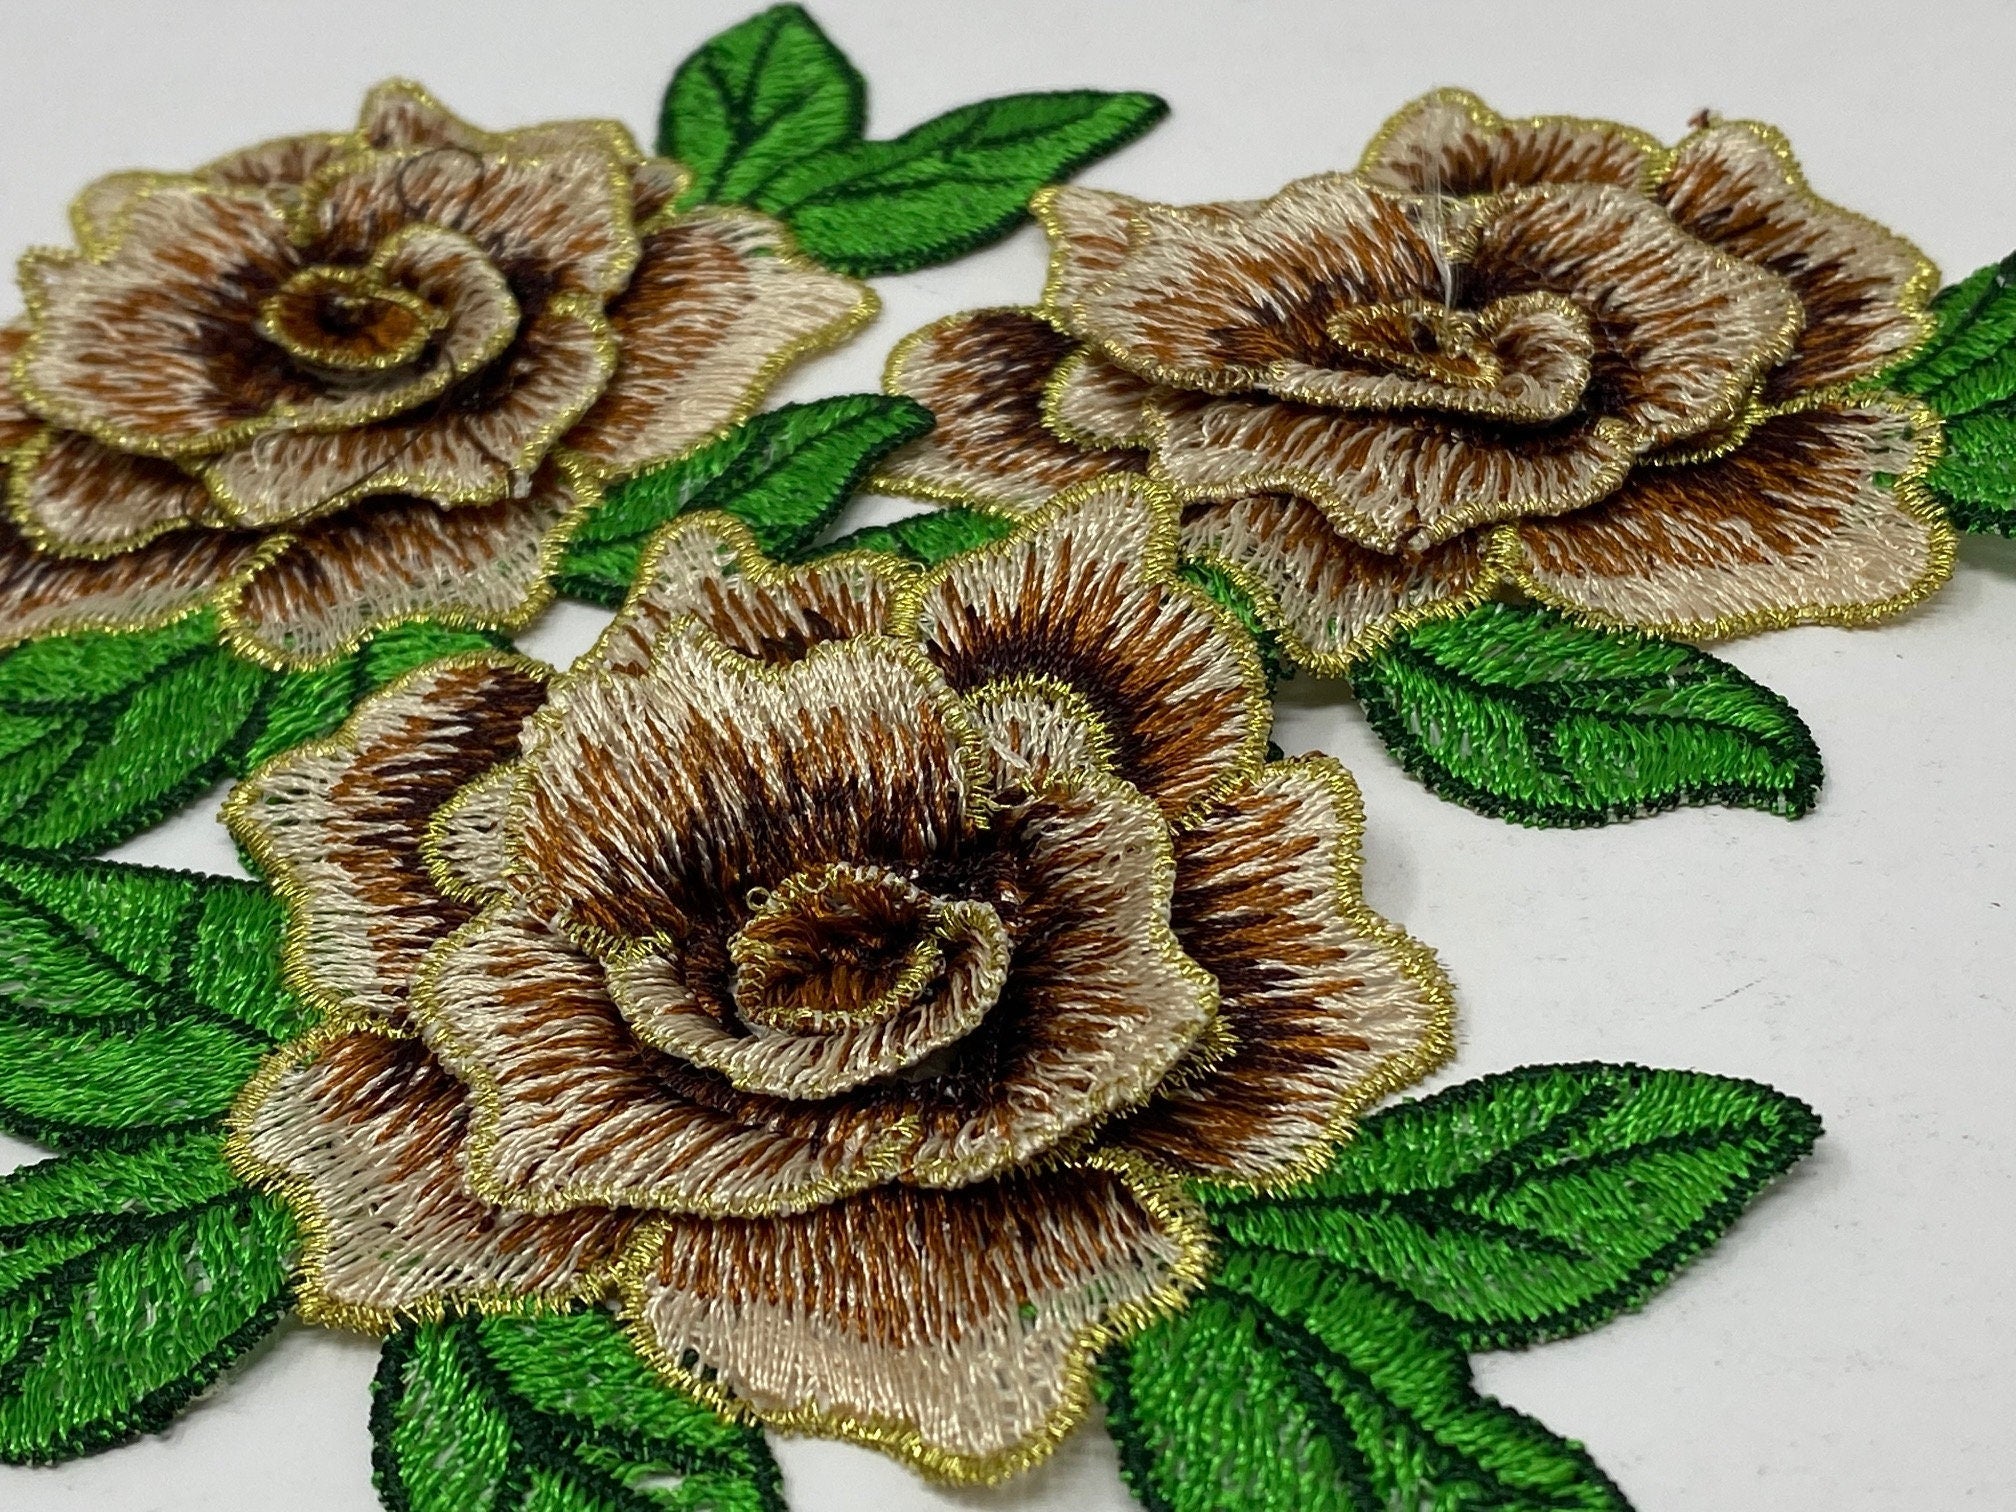 NEW, 2 pc set, Brown & Gold Roses (size 4-inches), matching lace sew-on  floral patches (2 pcs), Flower Patches, Rose Lace Patches